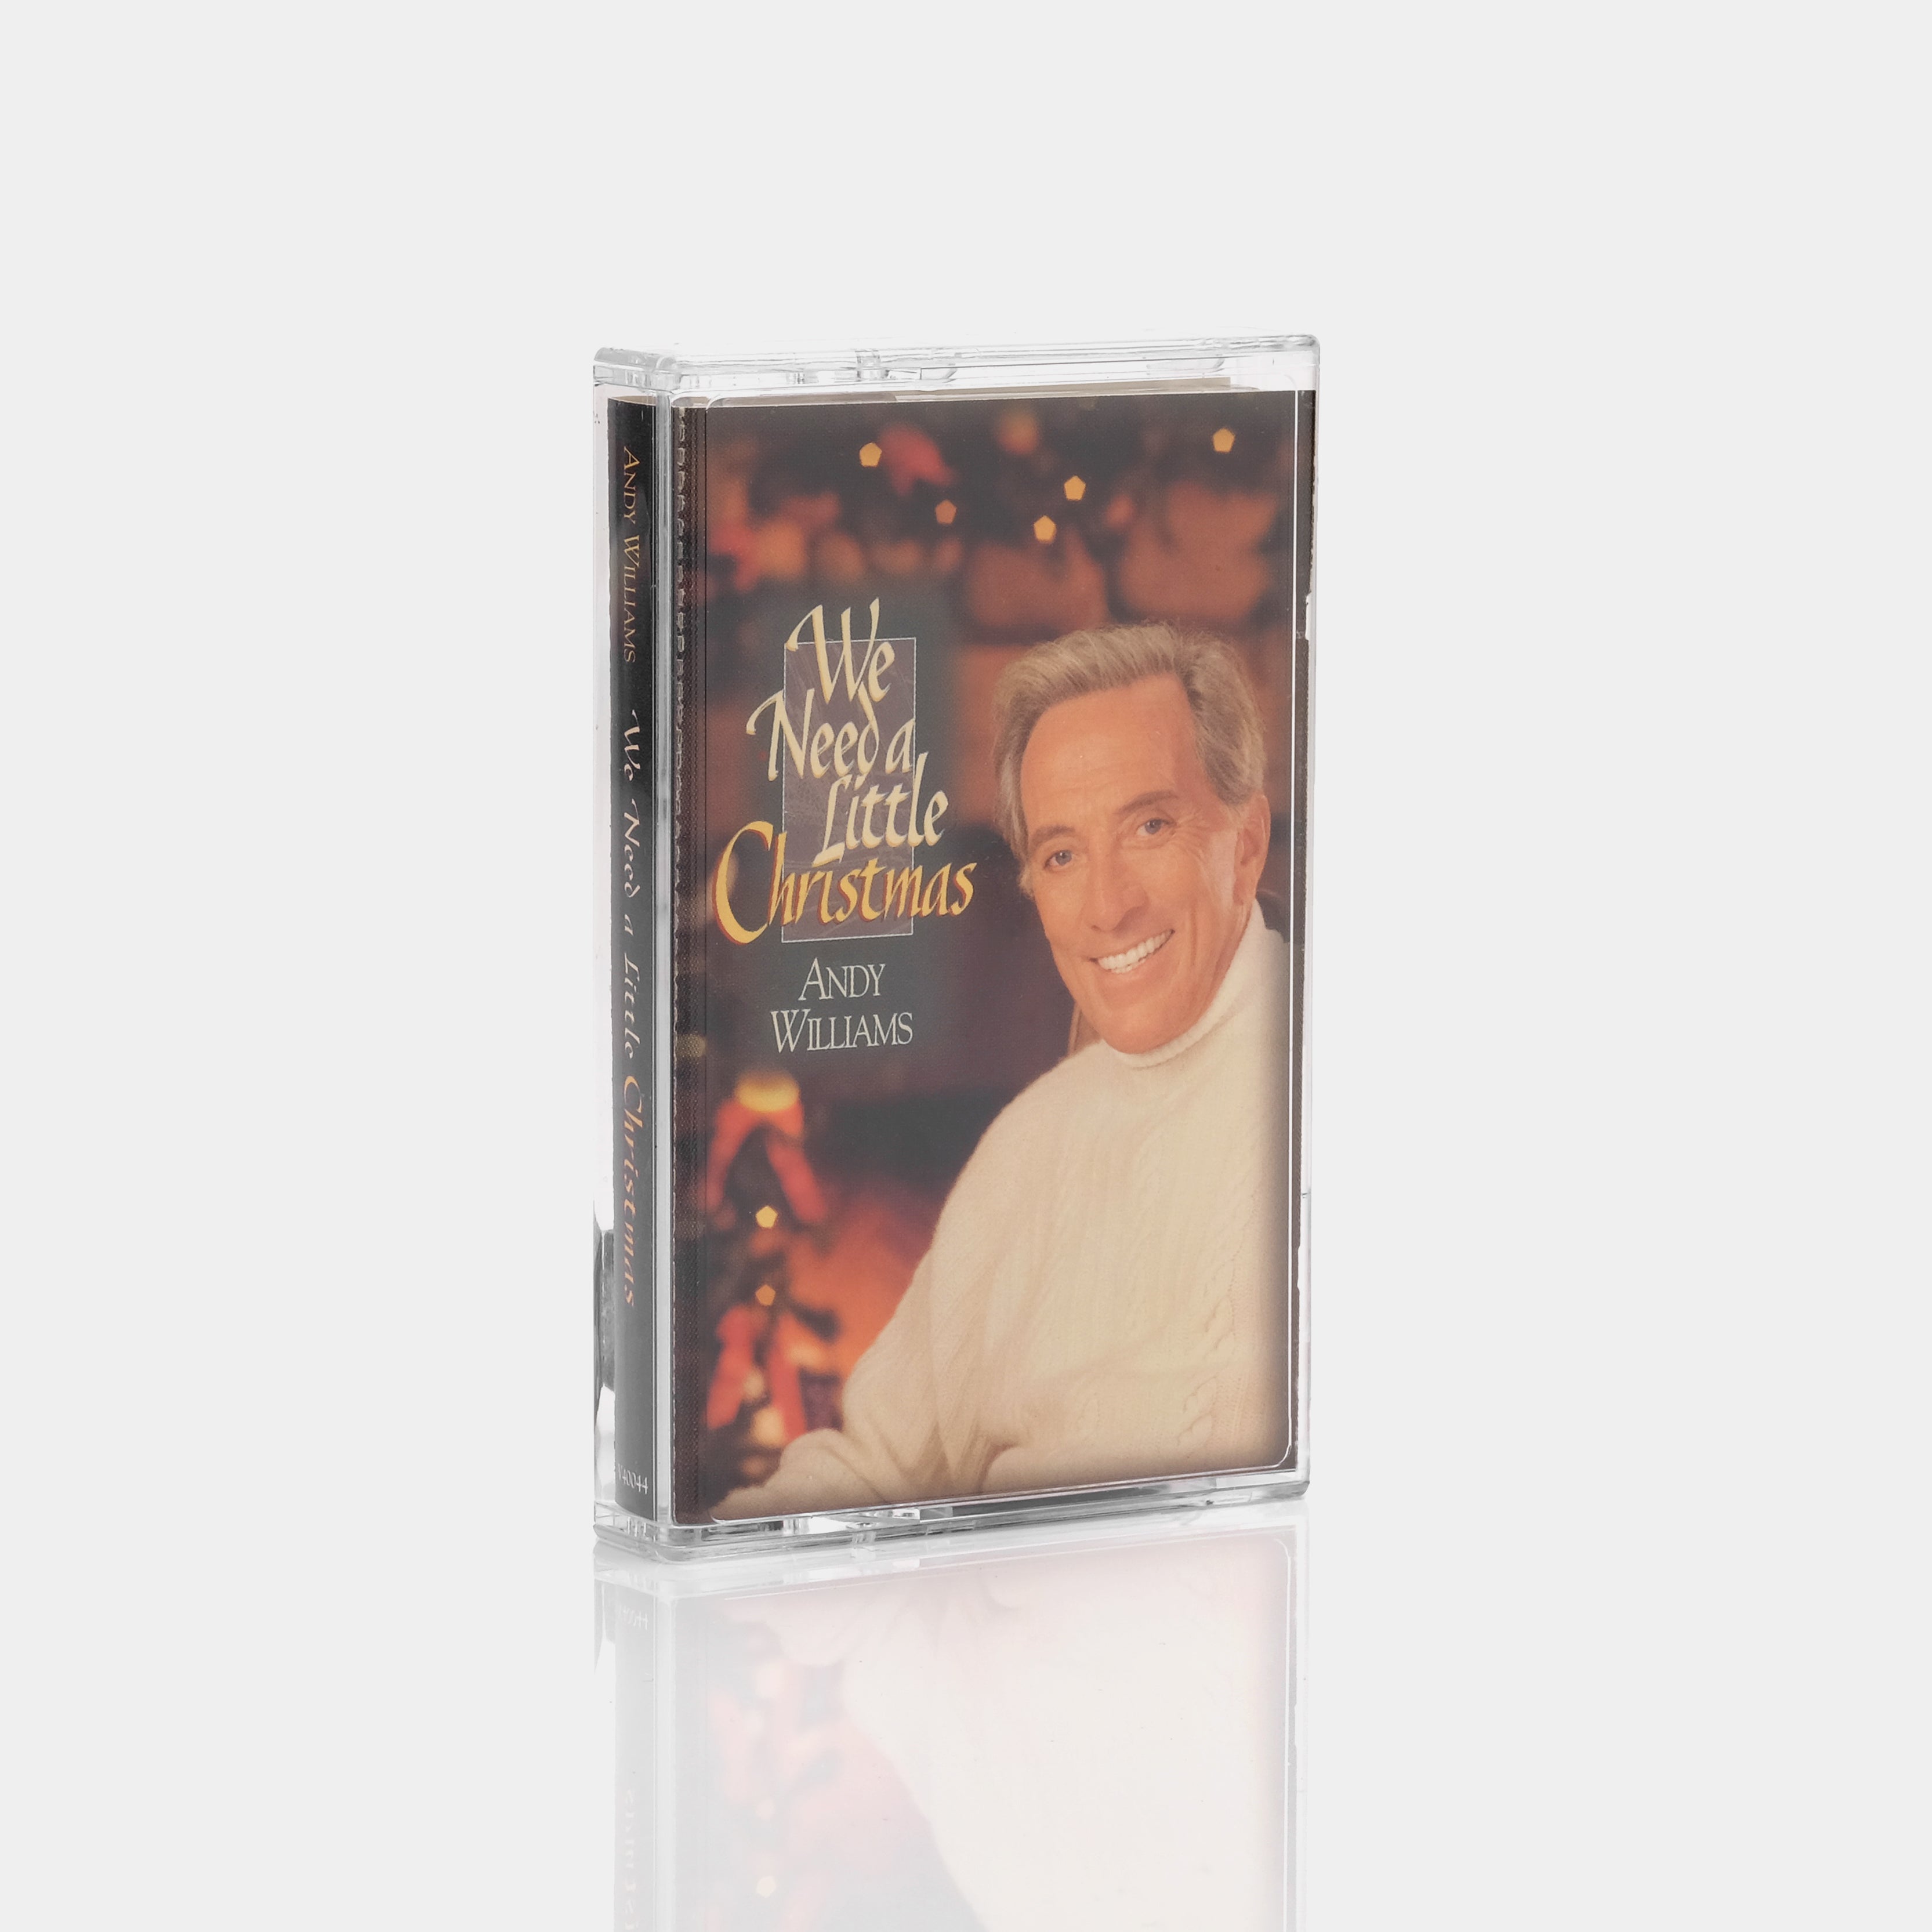 Andy Williams - We Need A Little Christmas Cassette Tape